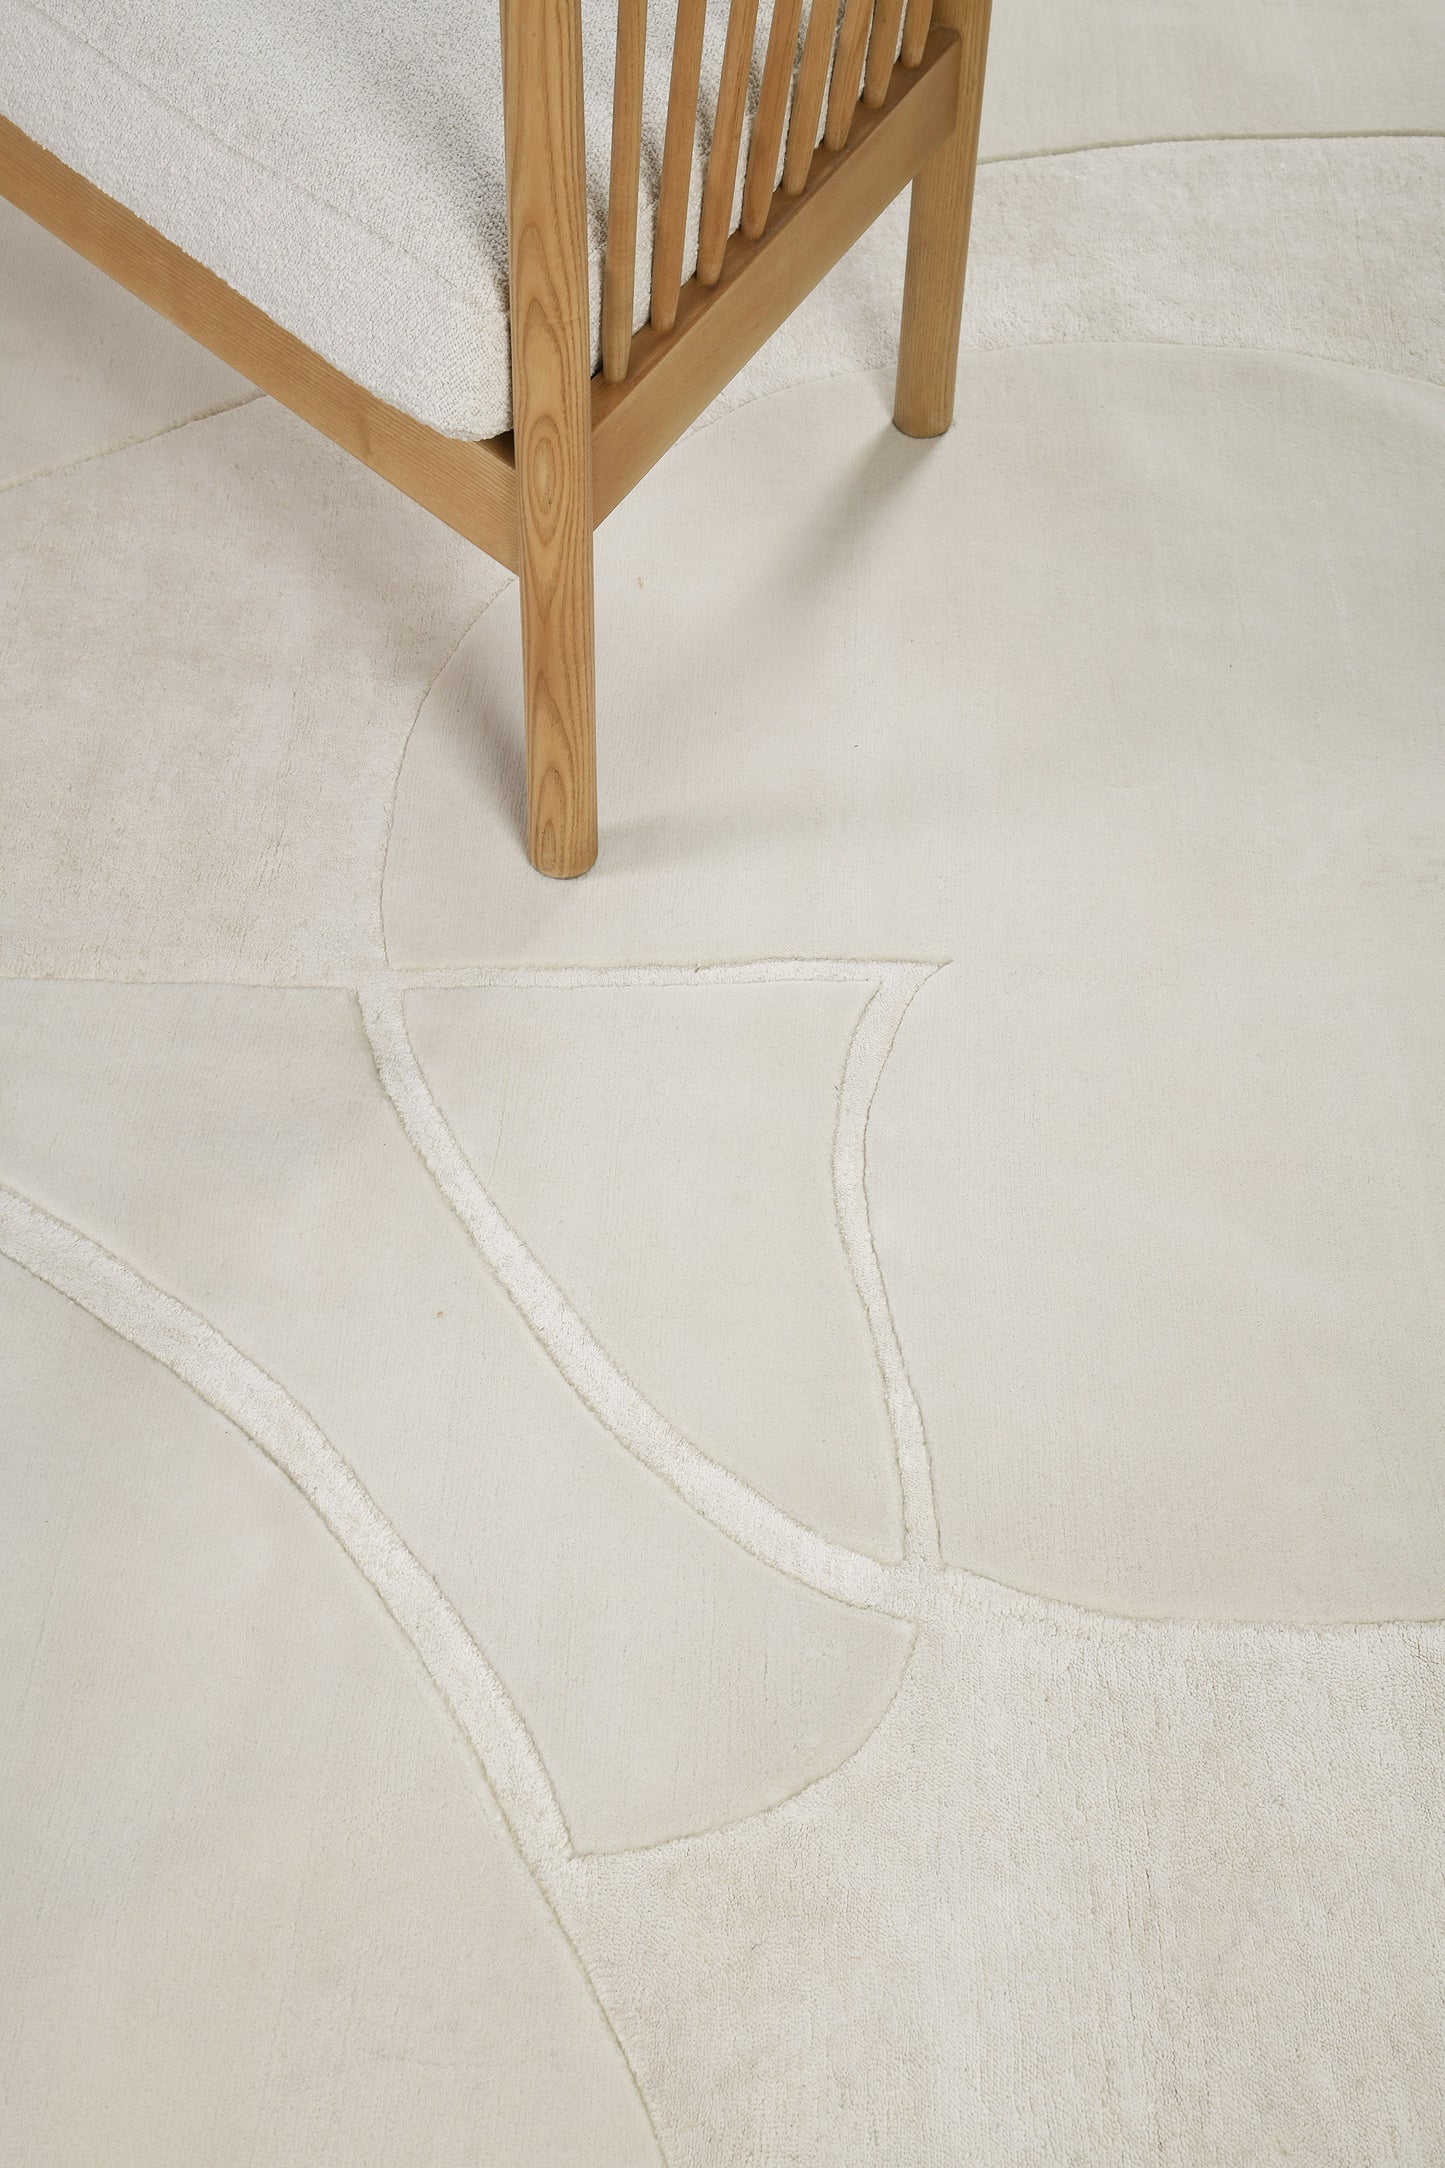 Modern Rug Image 2688 Contour by Claudia Afshar